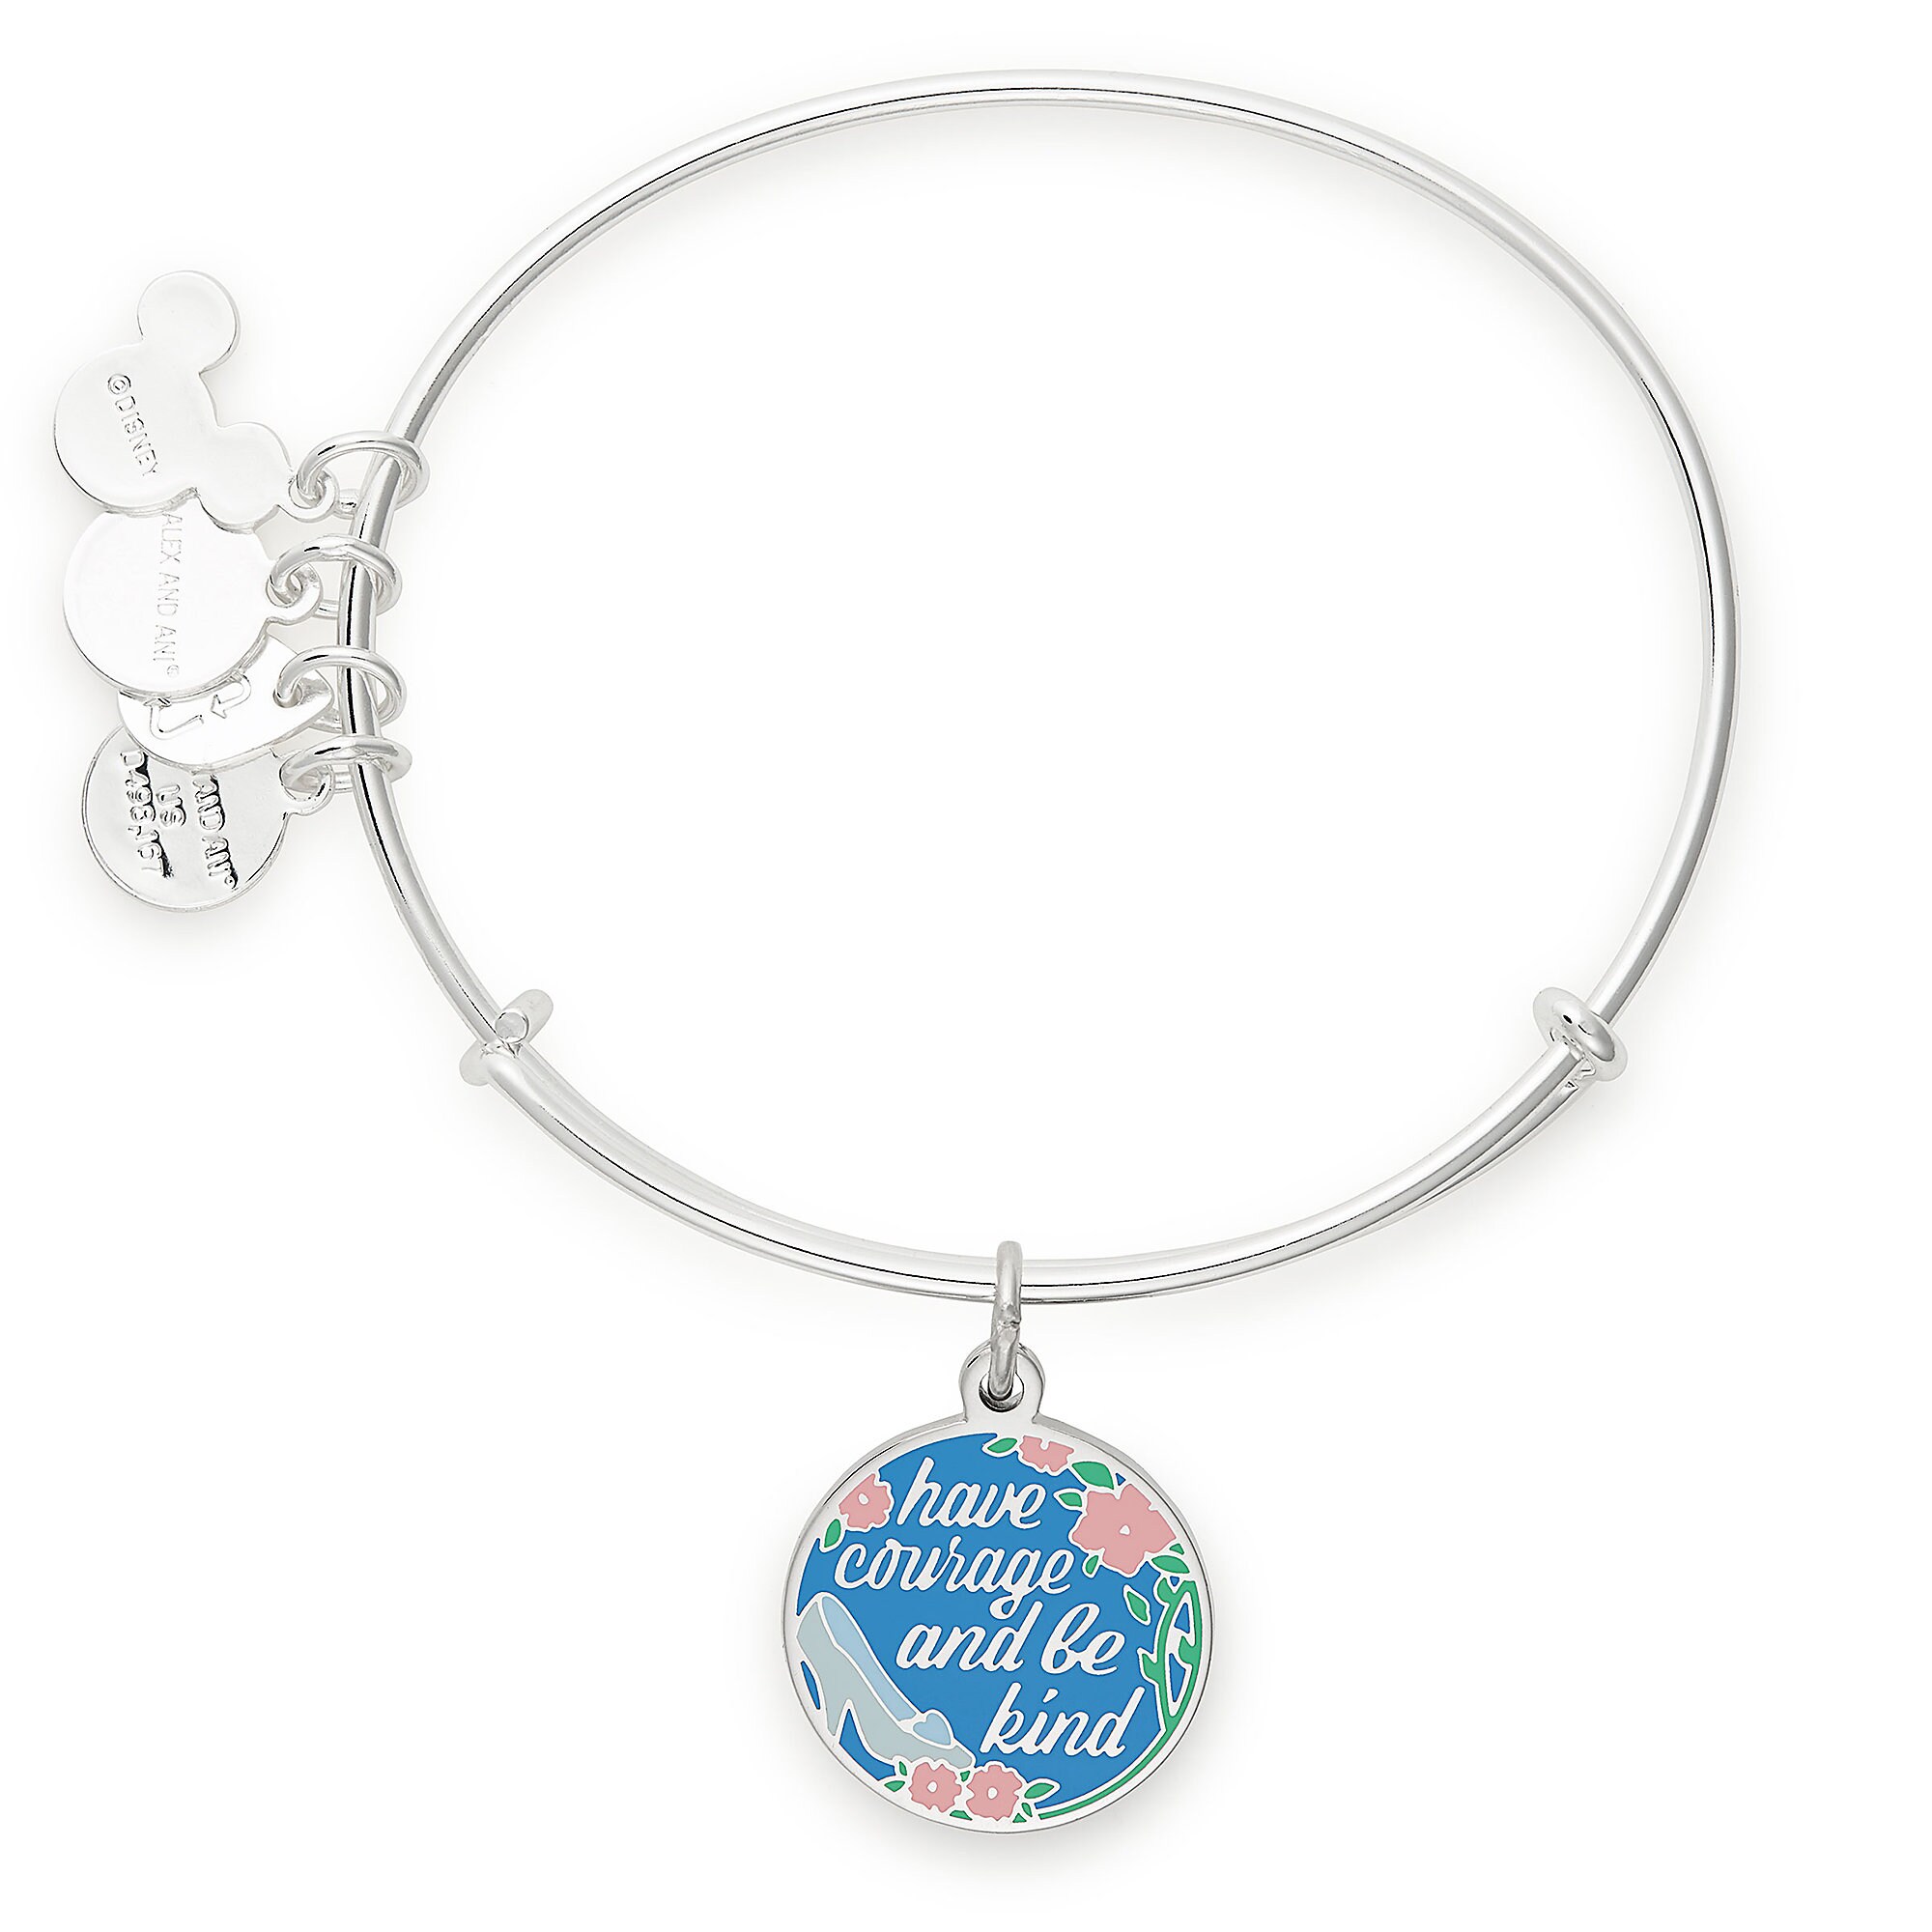 Cinderella ''Have courage and be kind'' Bangle by Alex and Ani was ...